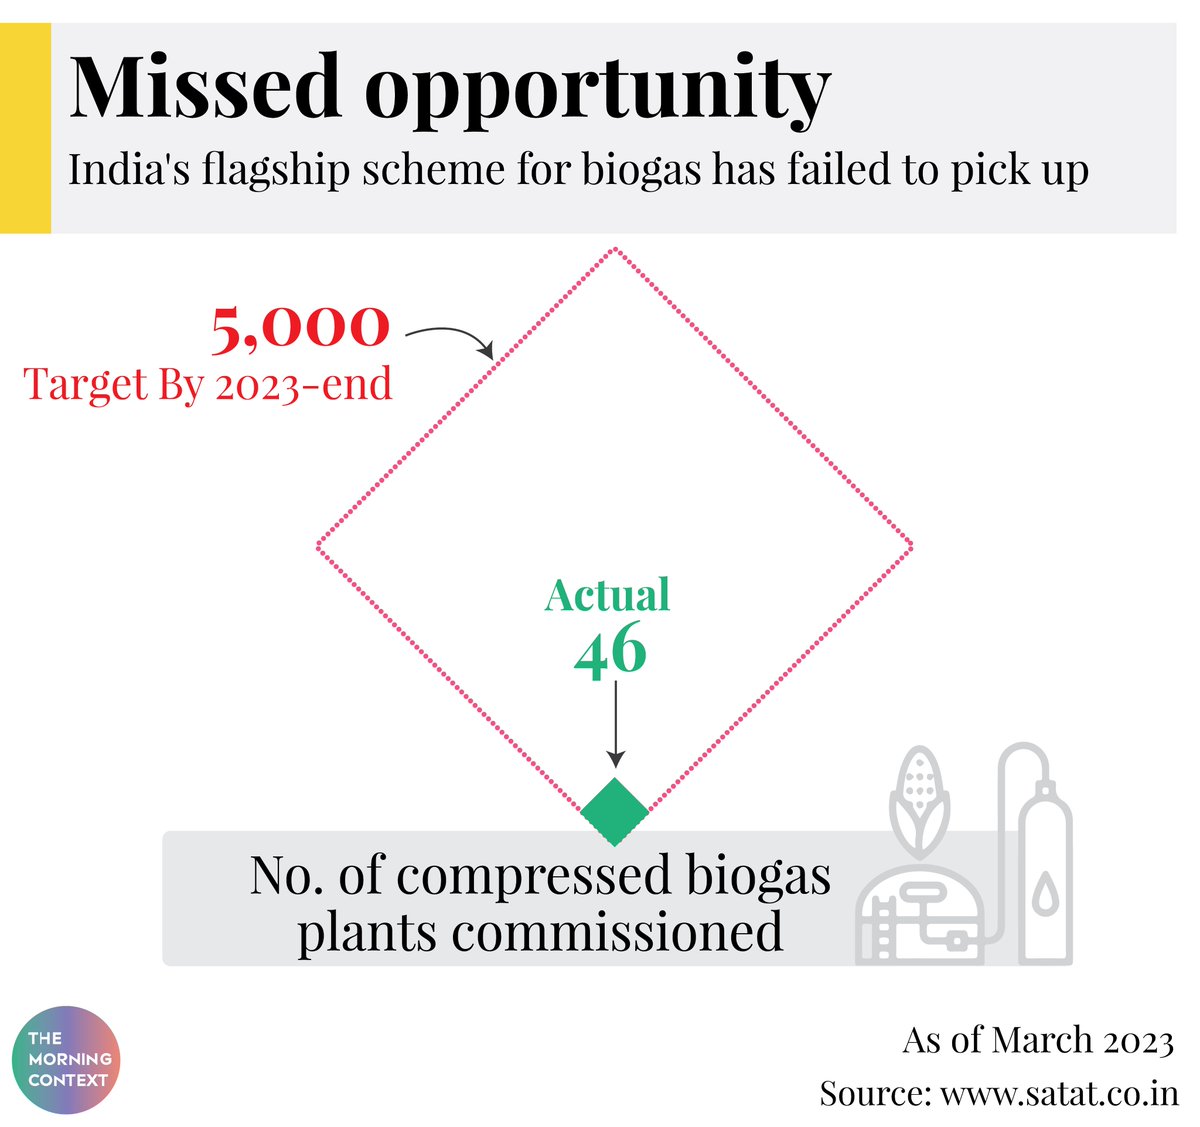 What’s stopping India from achieving its biogas ambitions? themorningcontext.com/chaos/whats-st…  @write2azman @MorningContext #biogas #biogasindustry @mnreindia #India @mygovindia #RenewableEnergy #business #organicwaste